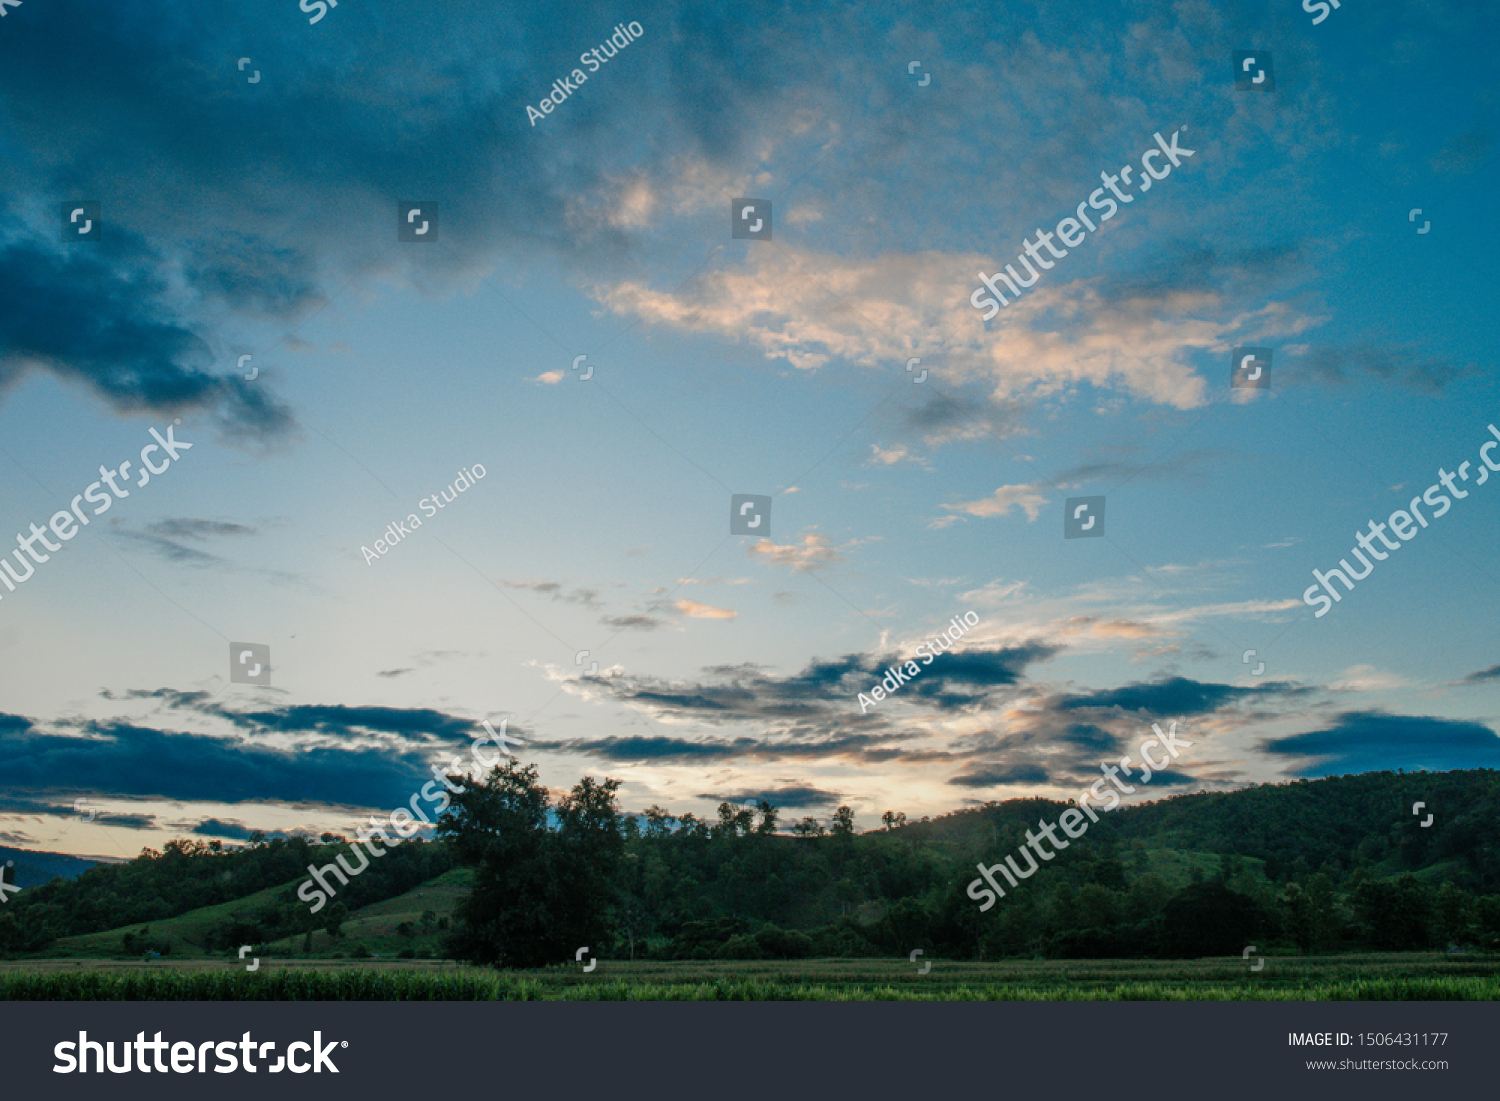 Colorful cloudy sky after rain, Beautiful evening skyscape. Sun's rays shine through hole in black clouds after rain. Sky, Golden sky. Natural background. Inspirational concept. #1506431177